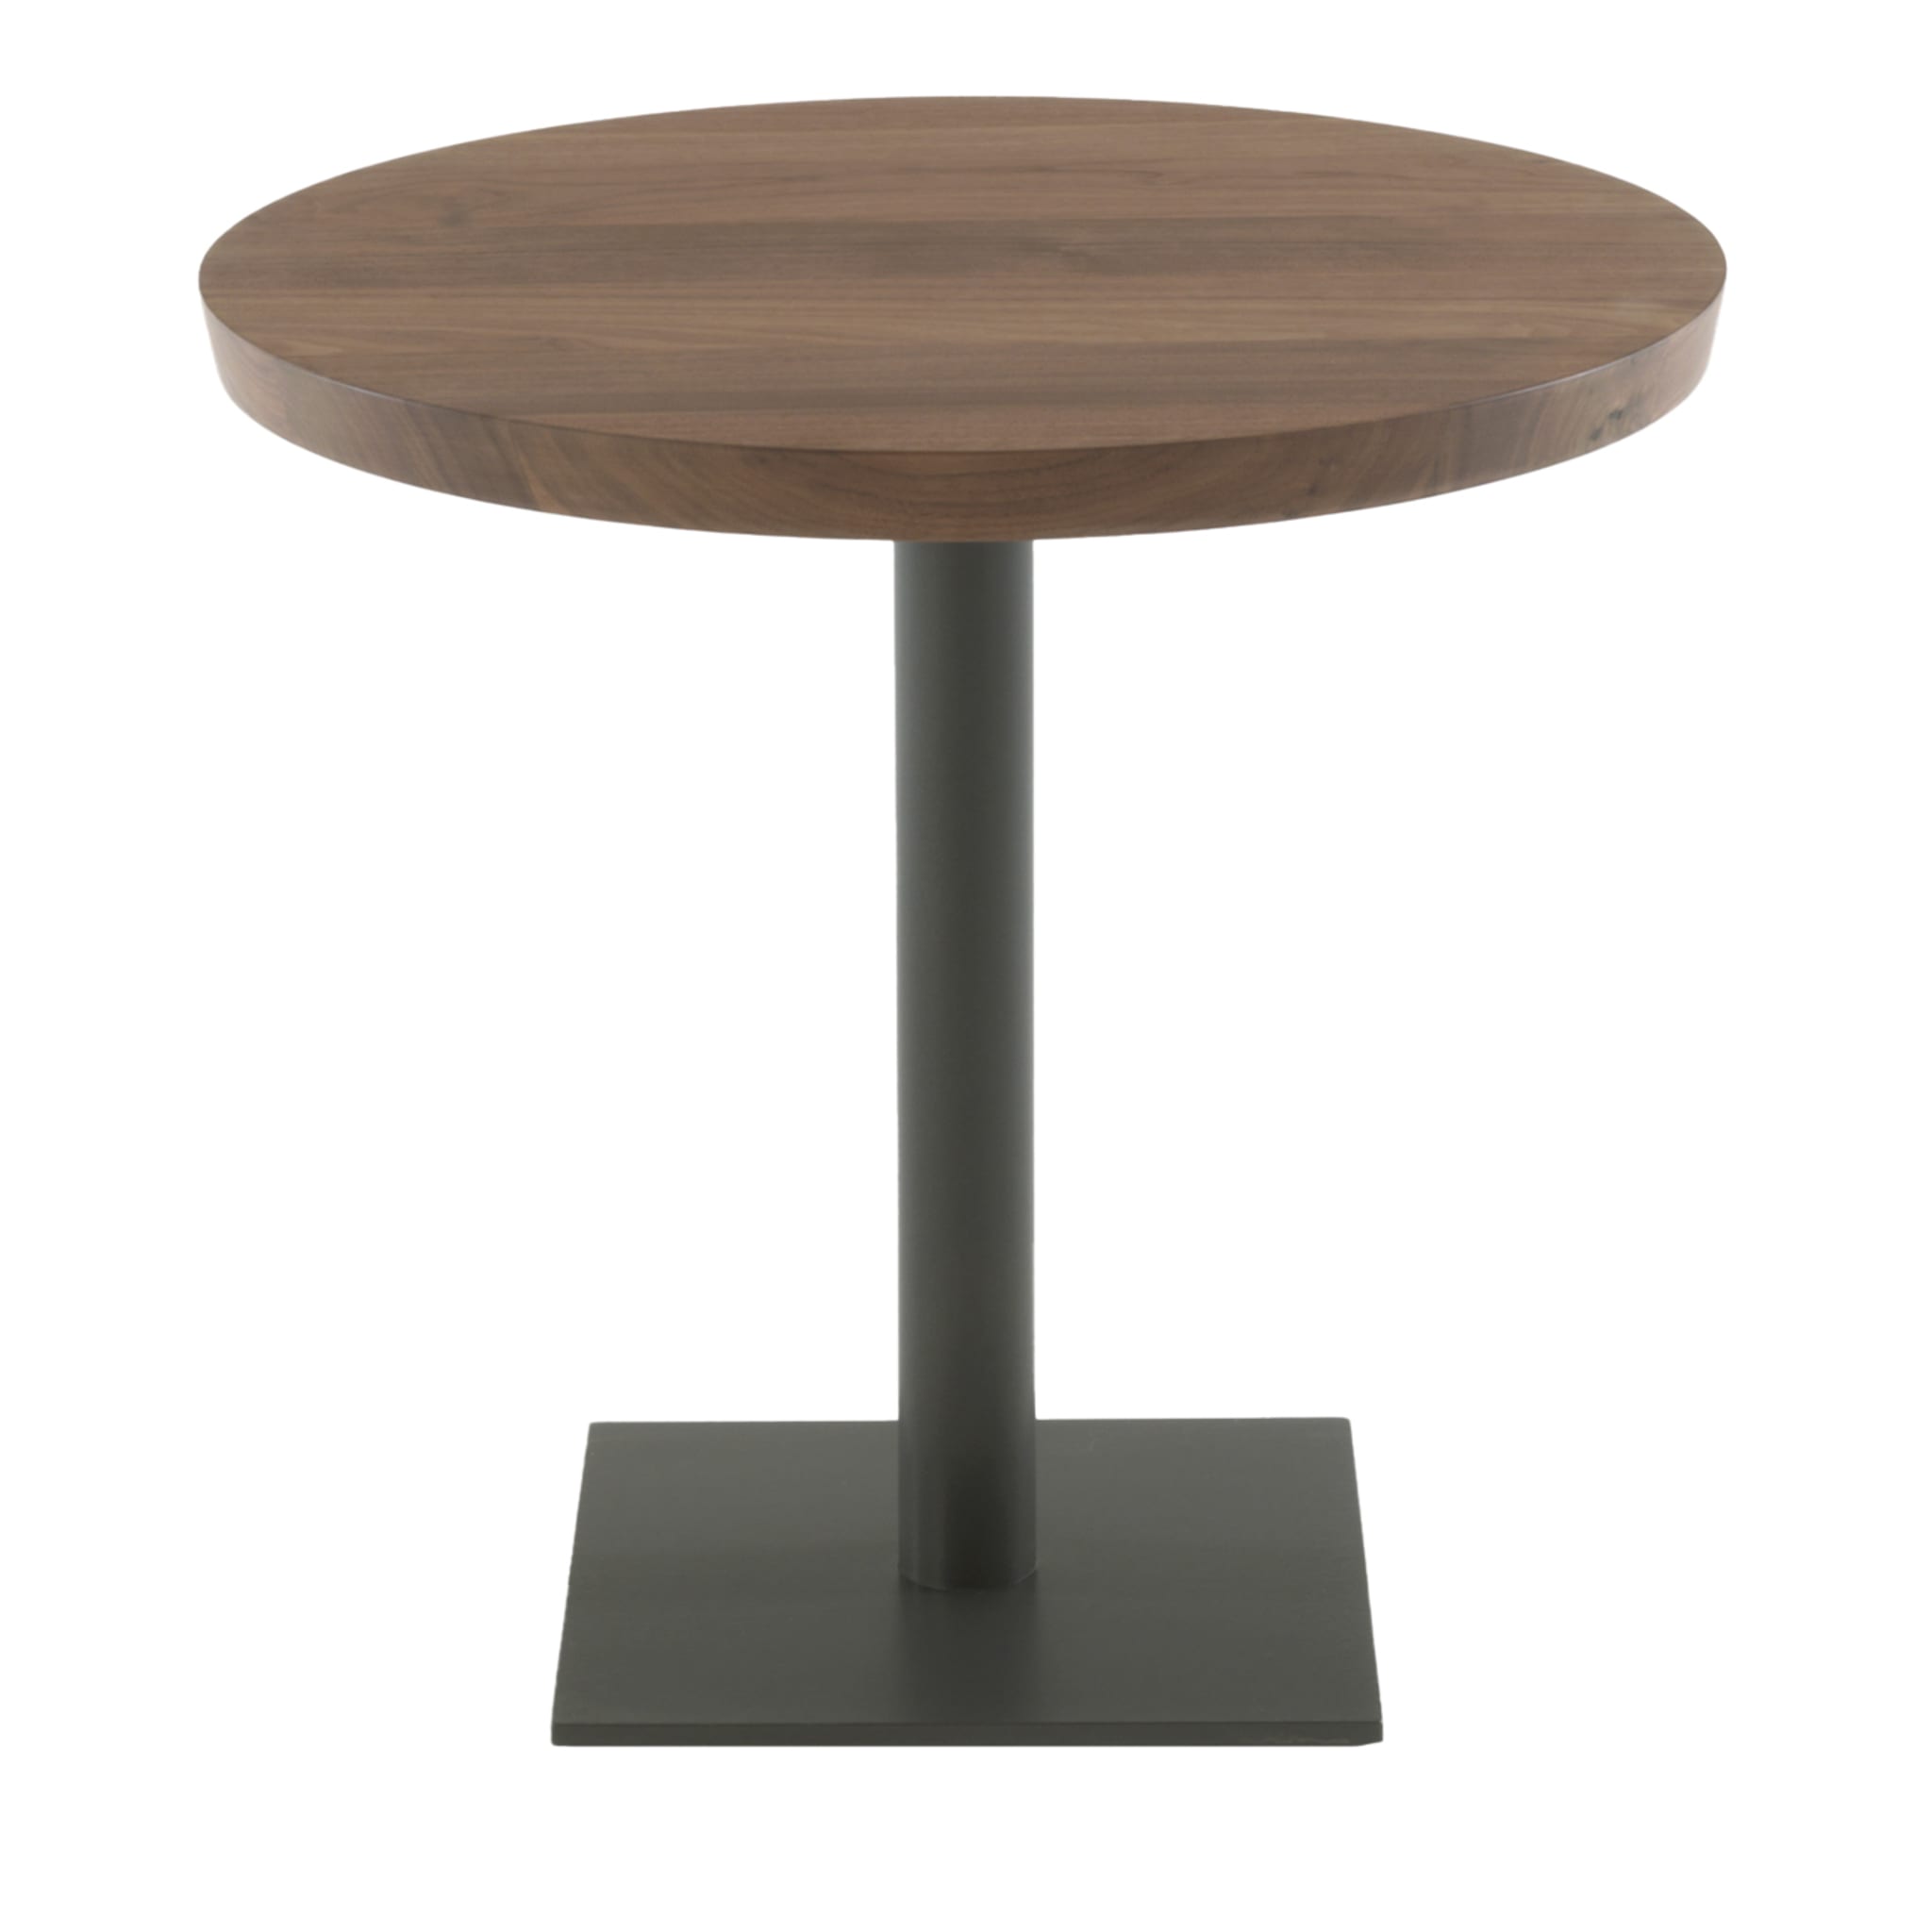 Pebbles Small Round Coffee Table by Terry Dwan - Main view